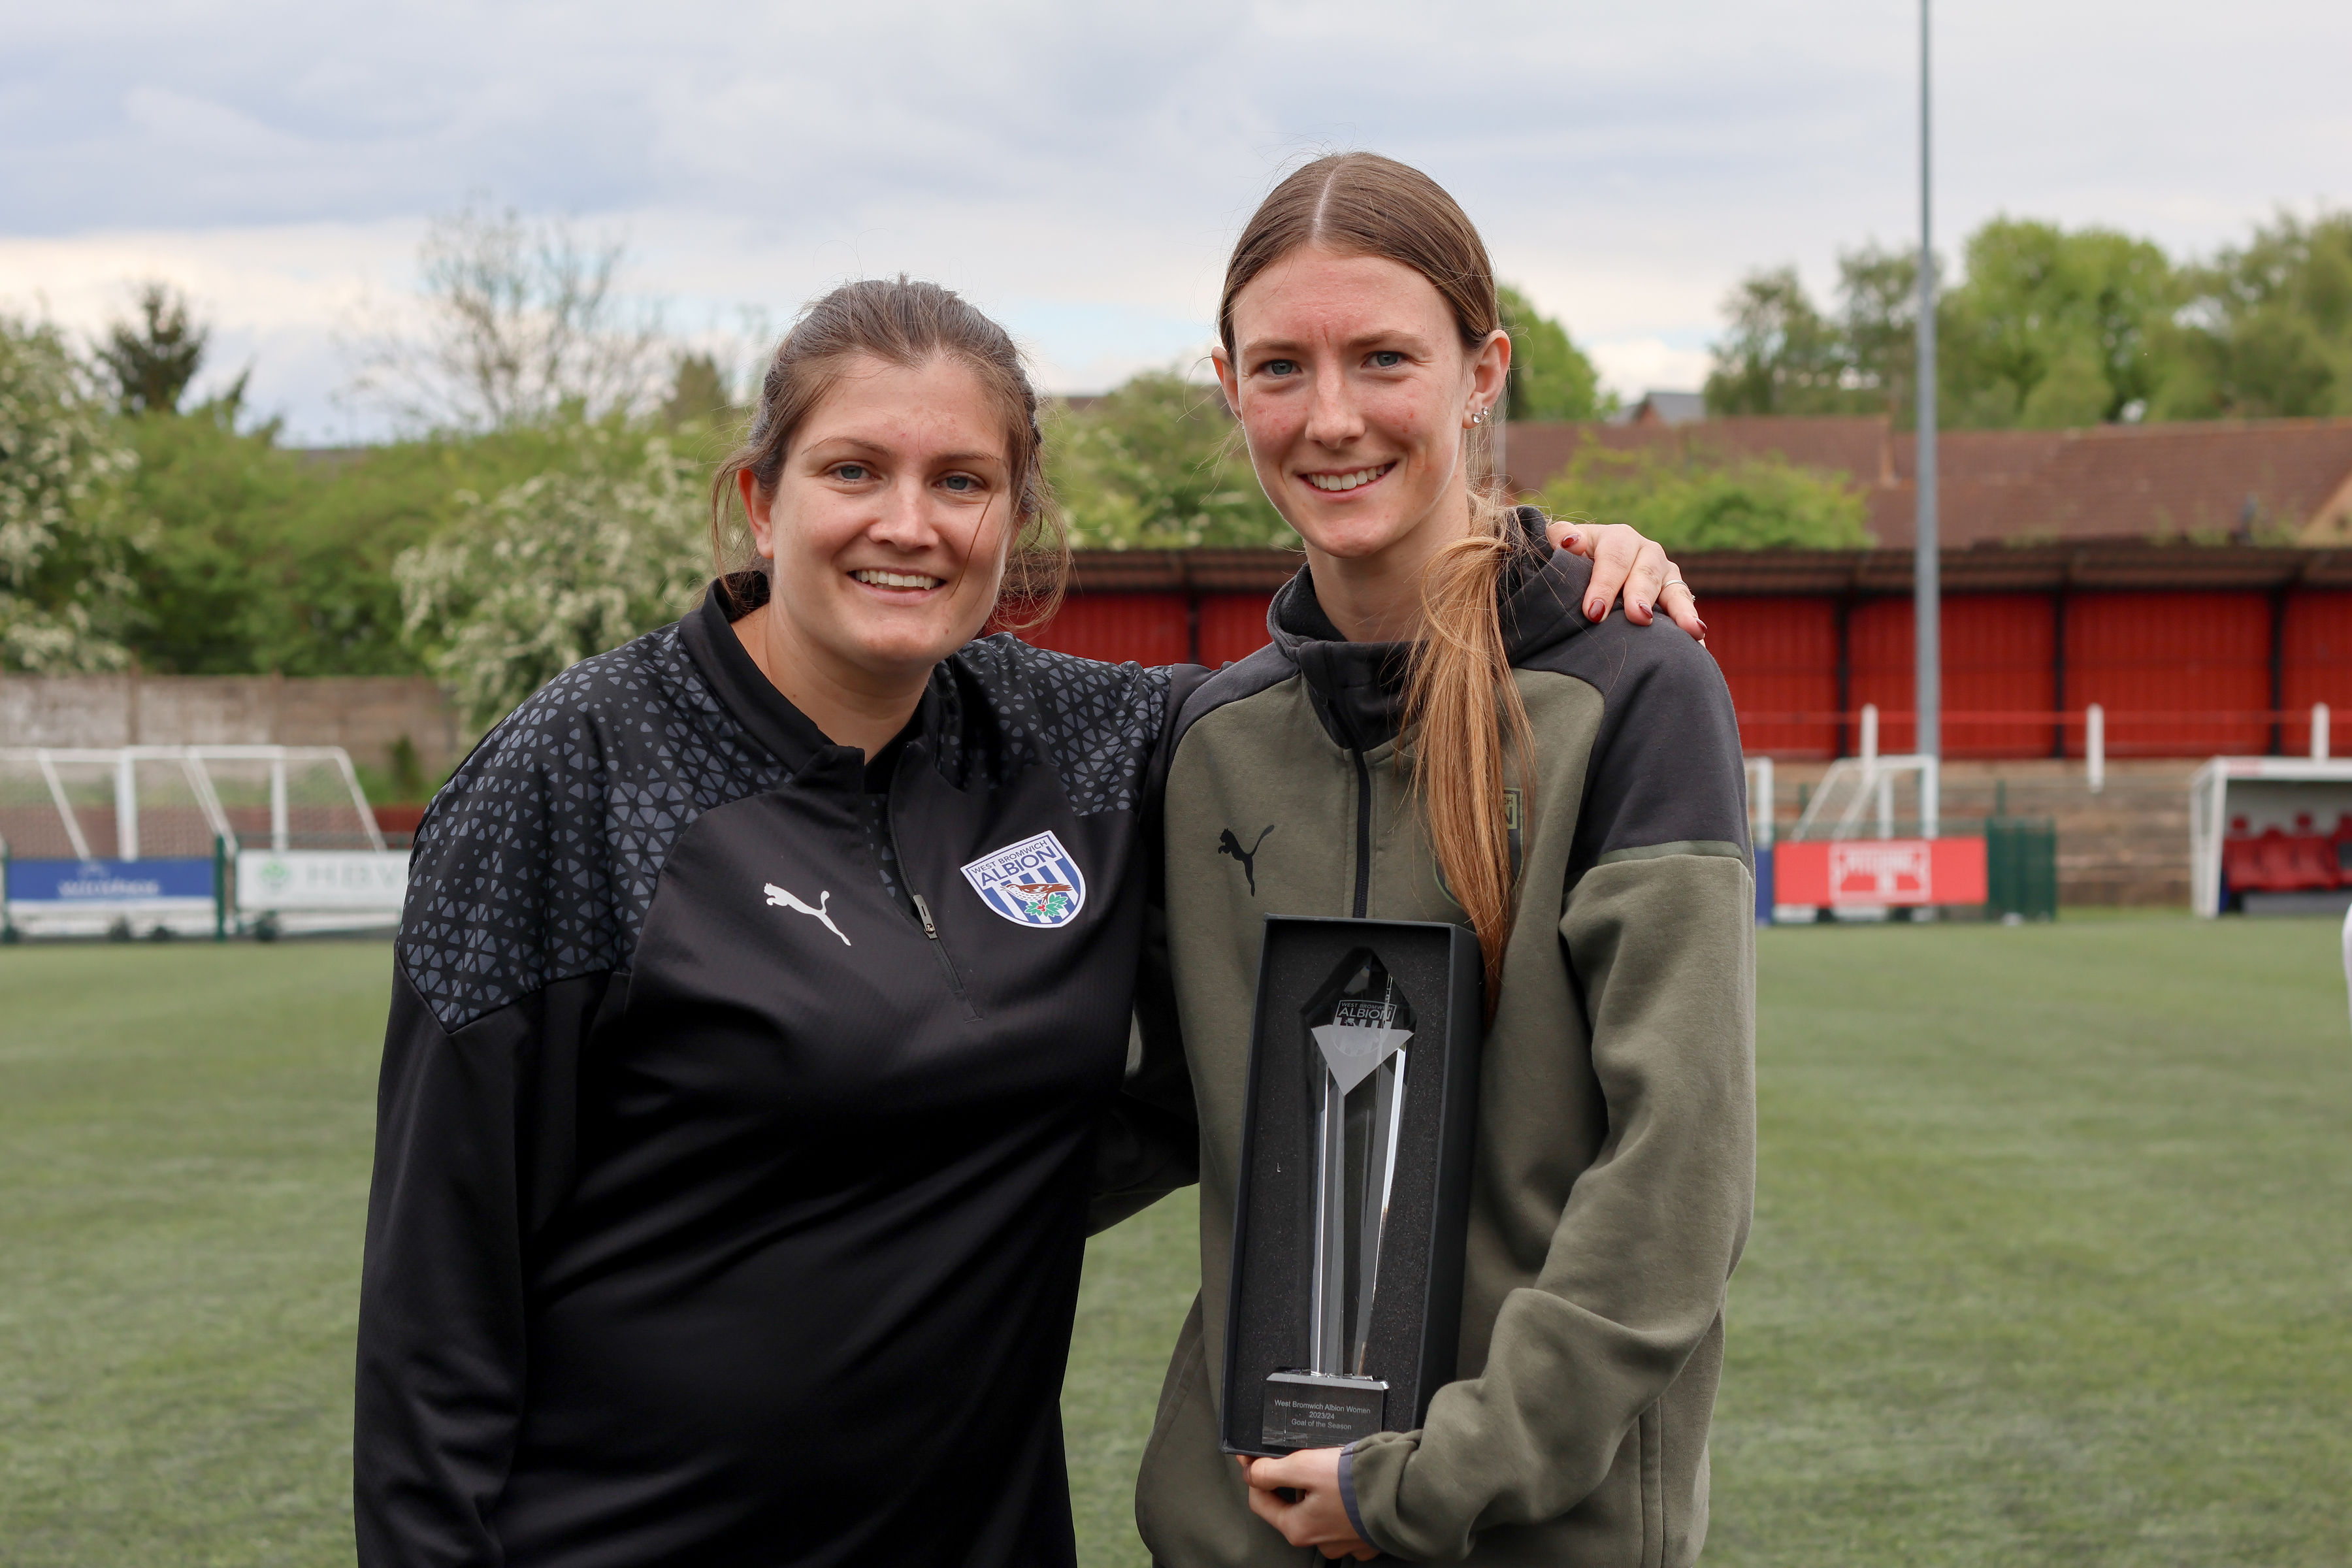 Siobhan Hodgetts-Still poses for a photo with Jess Reavill who is holding her Goal of the Season trophy